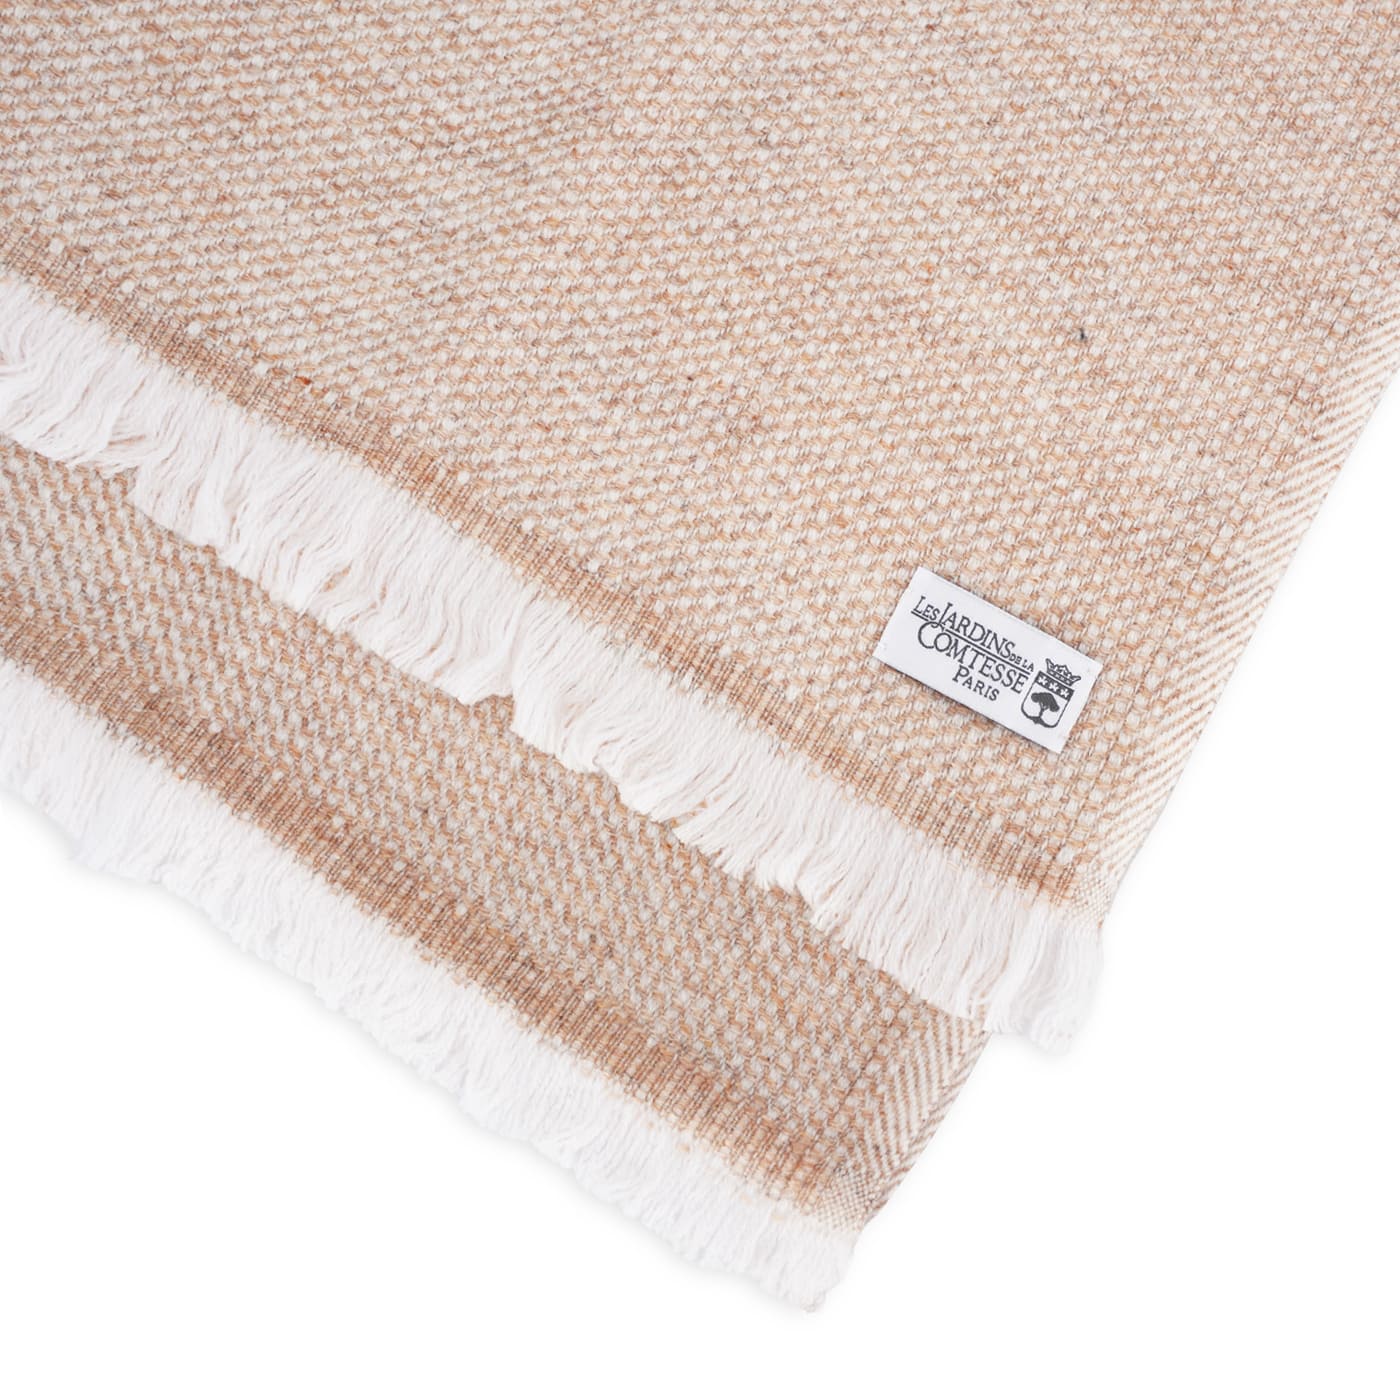 Men's & Women's cashmere and wool scarf 40 x 190 cm - Two-tone Camel / White